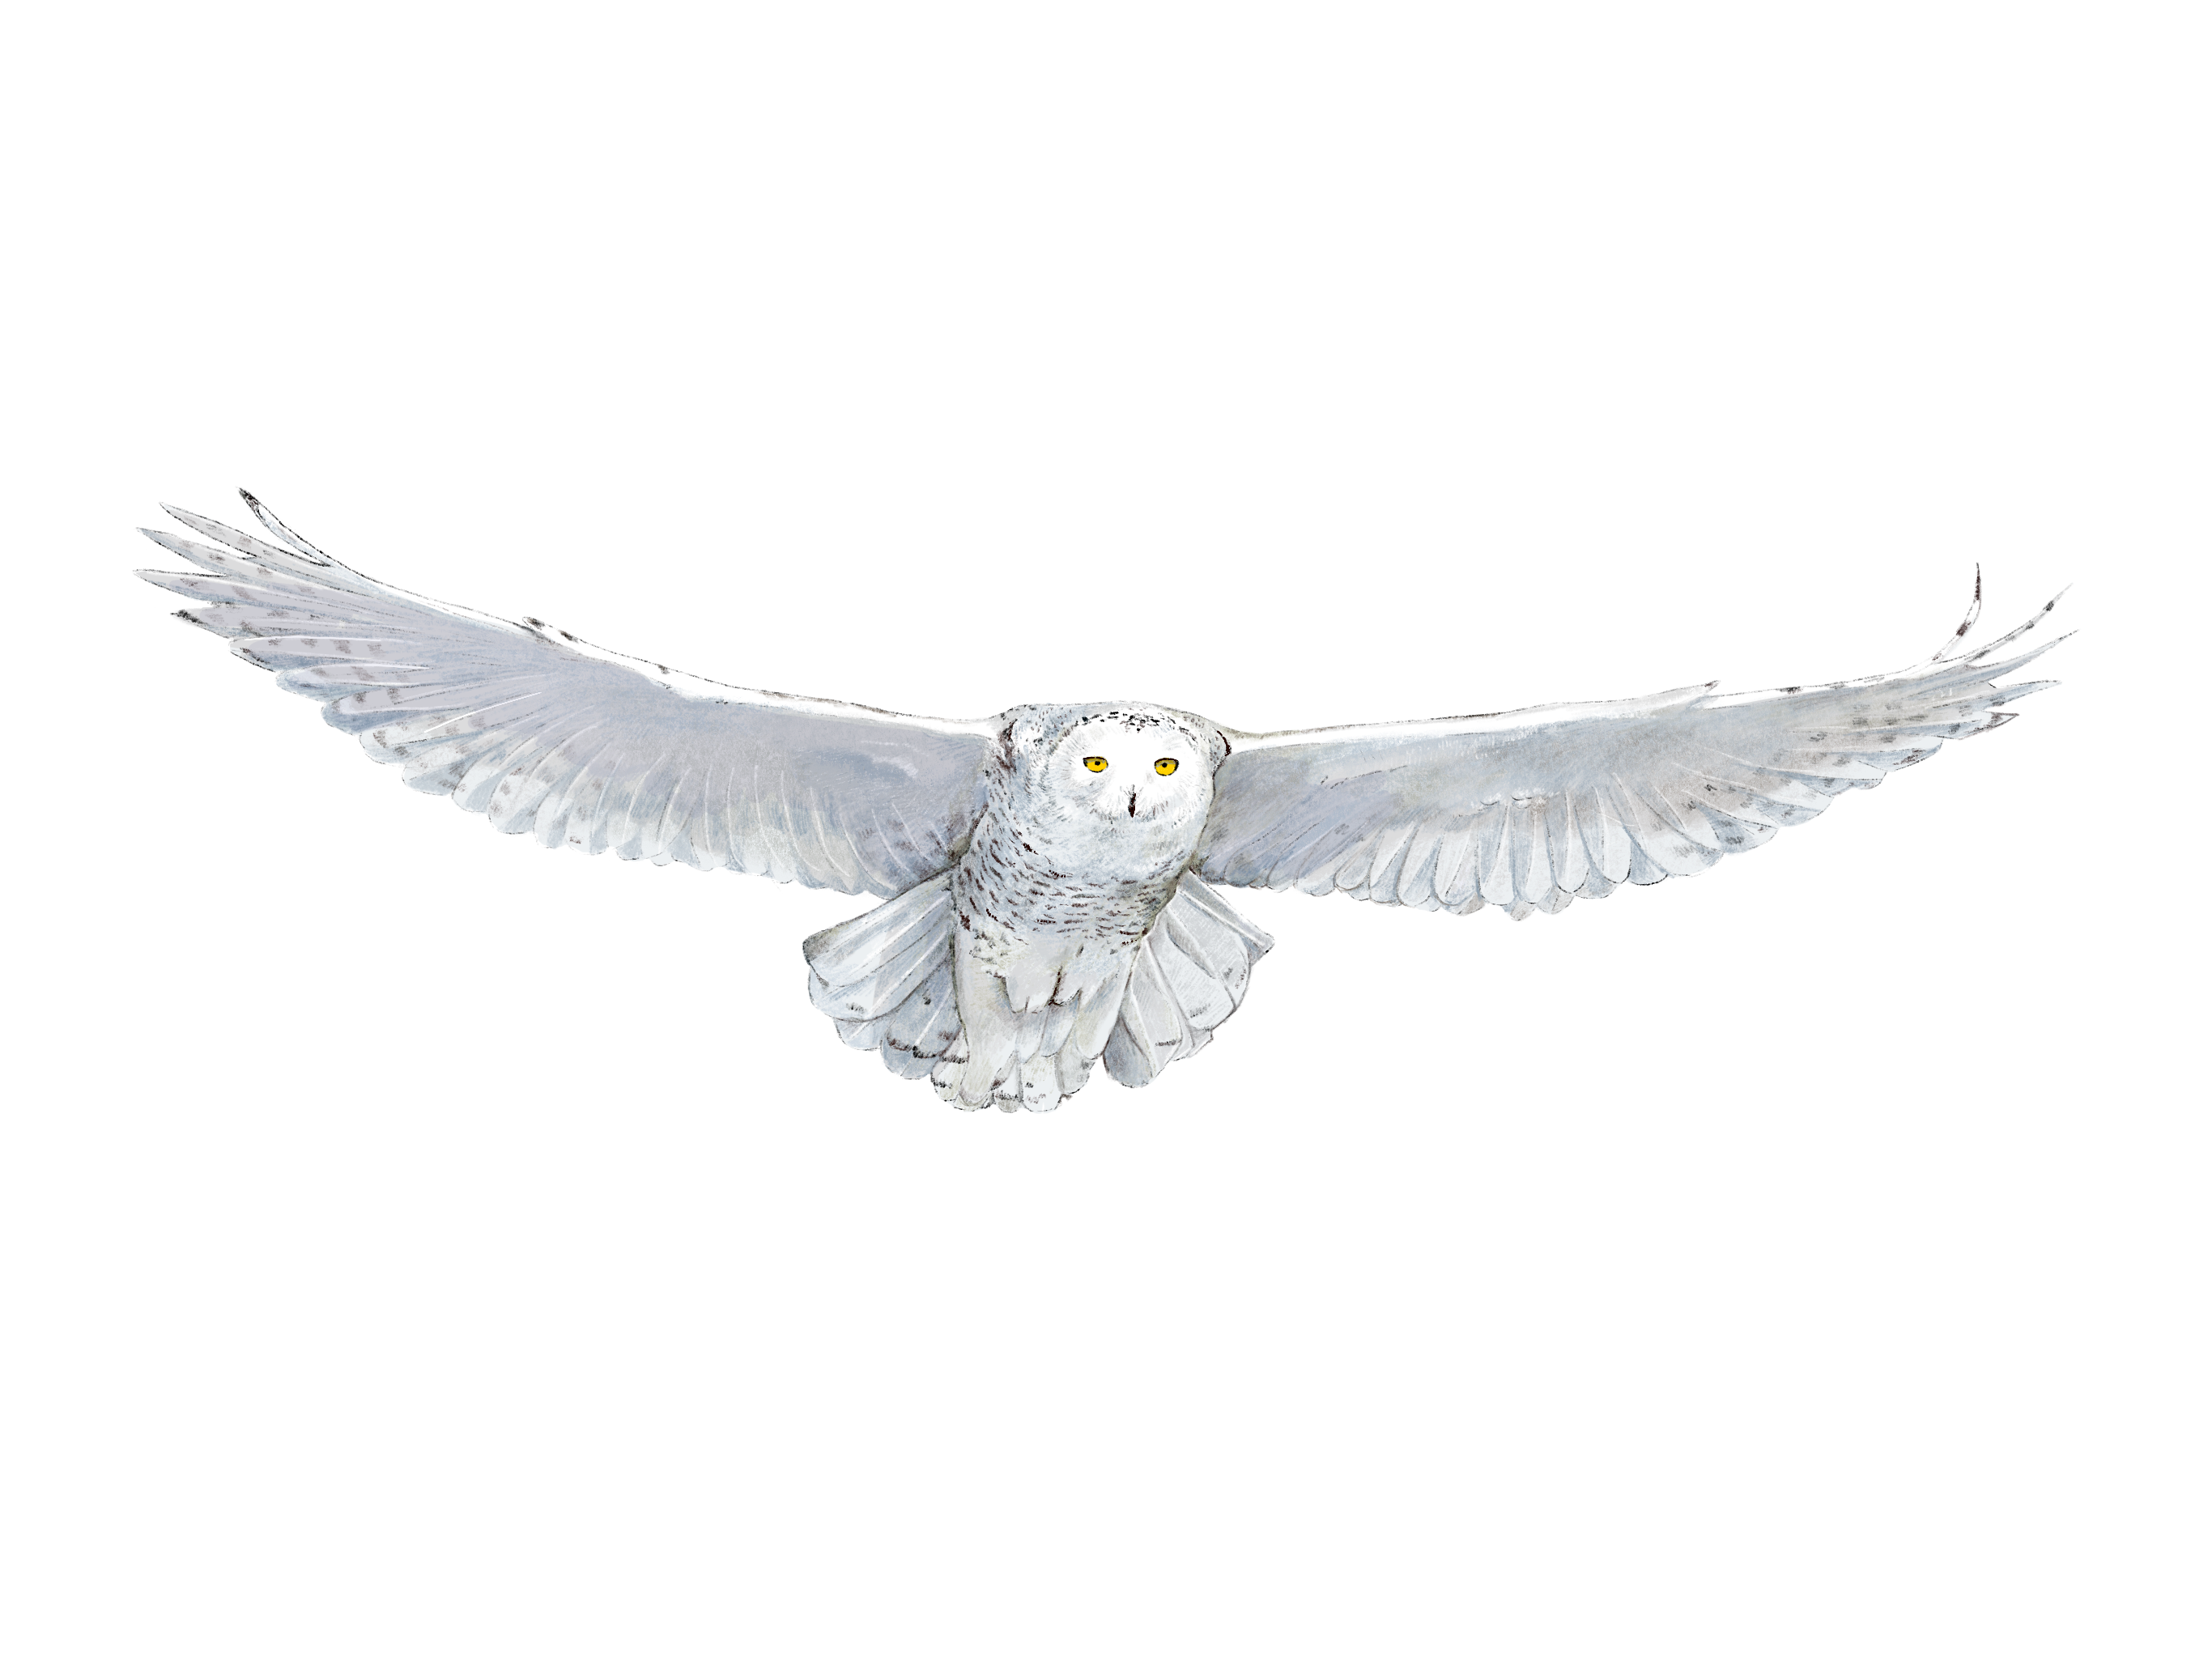 Snowy_Owl.png